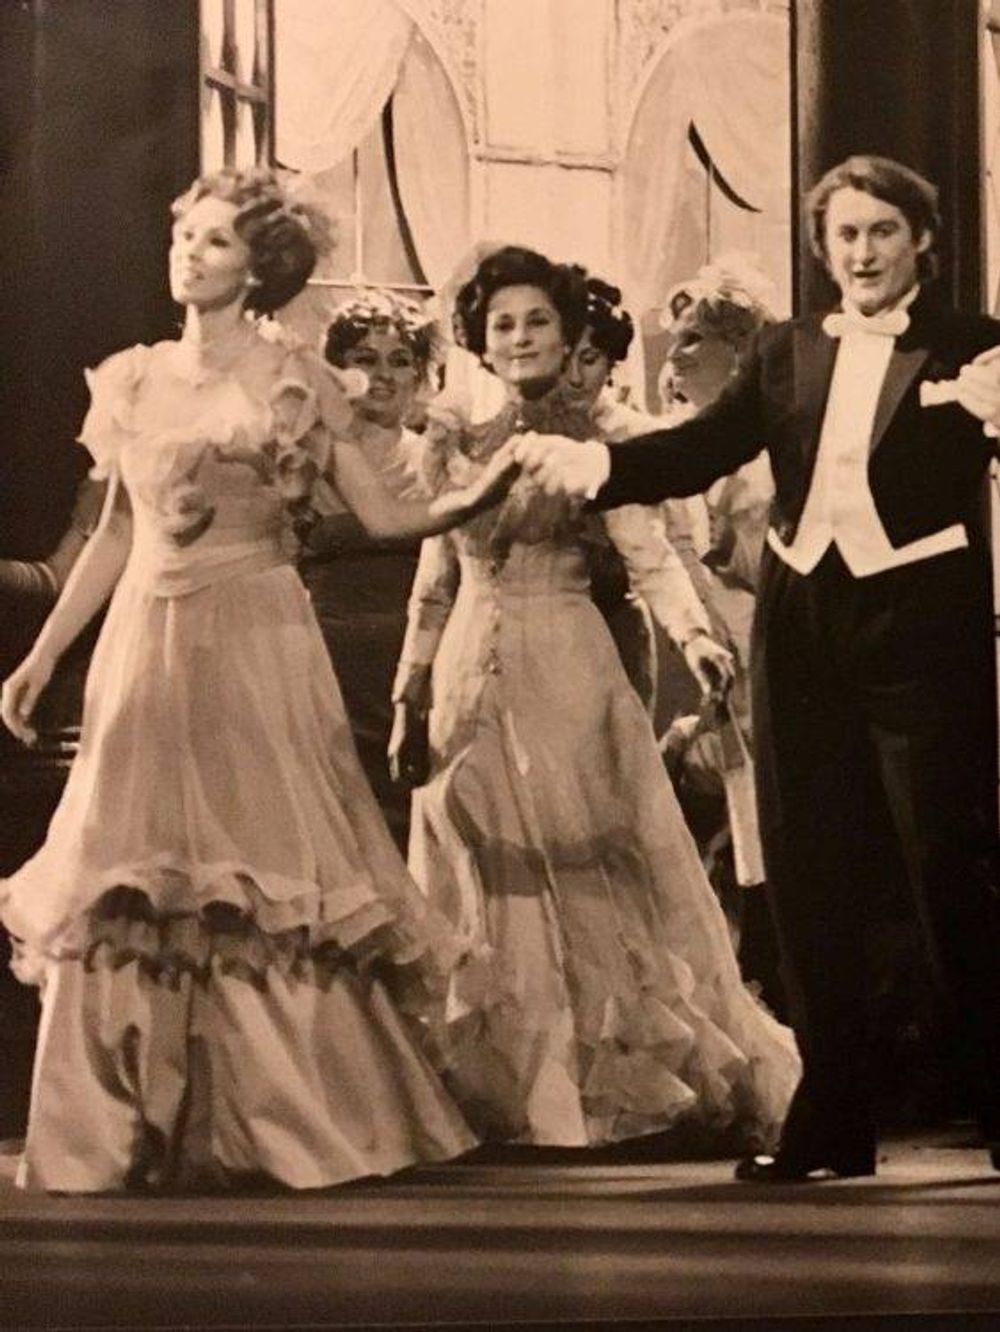 Deborah (far left) performs in The Merry Widow composed by Franz Lehár